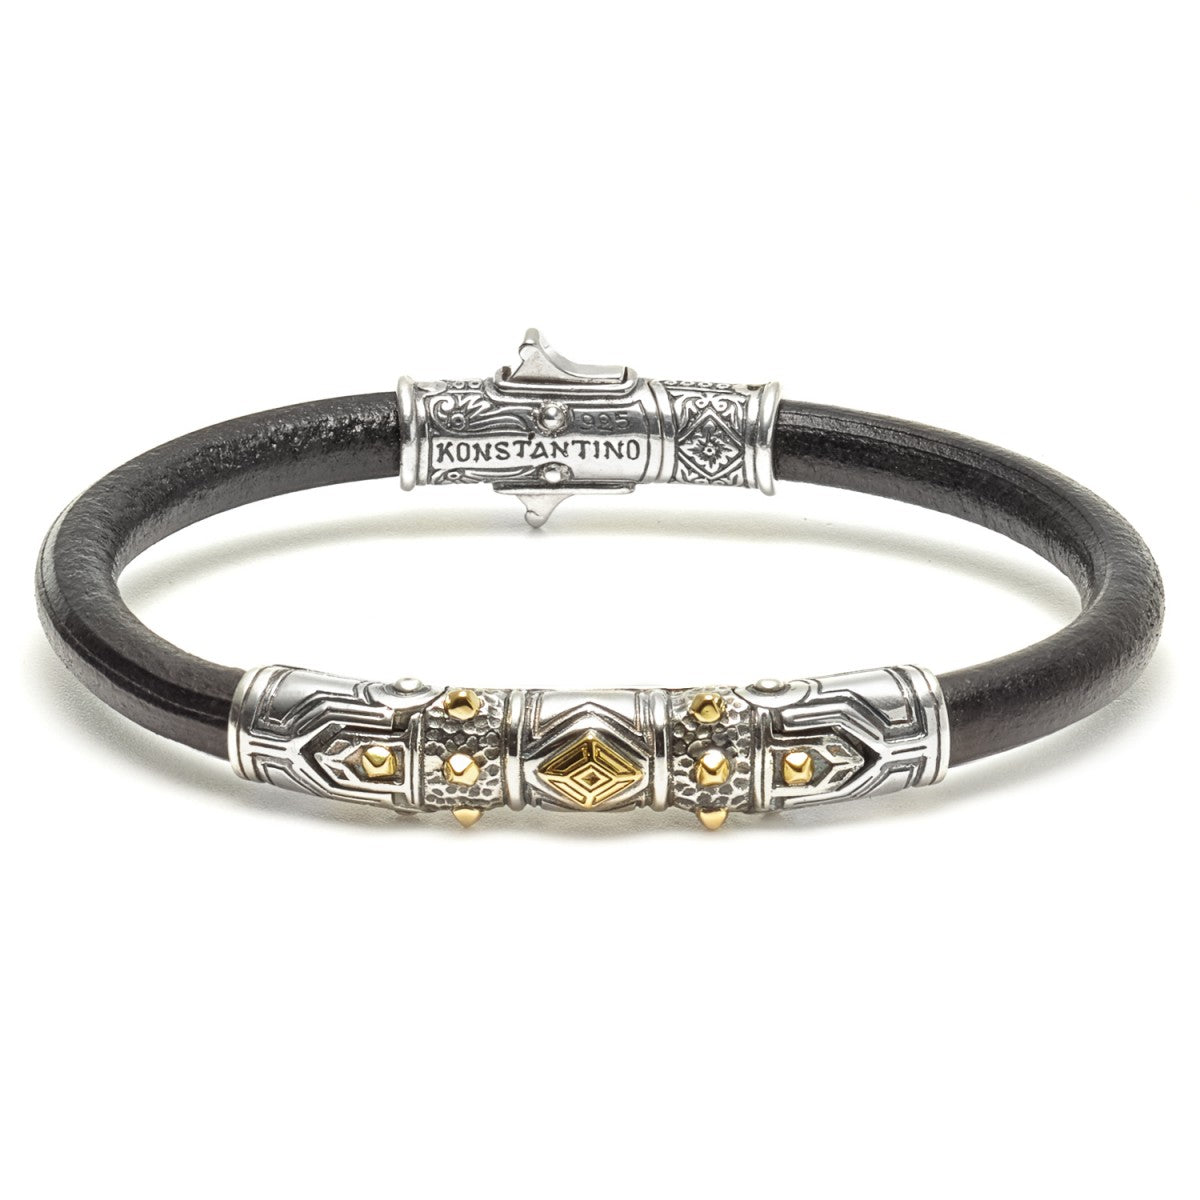 Konstantino Men's Hephaestus Collection Sterling Silver and Gold Leather Bracelet